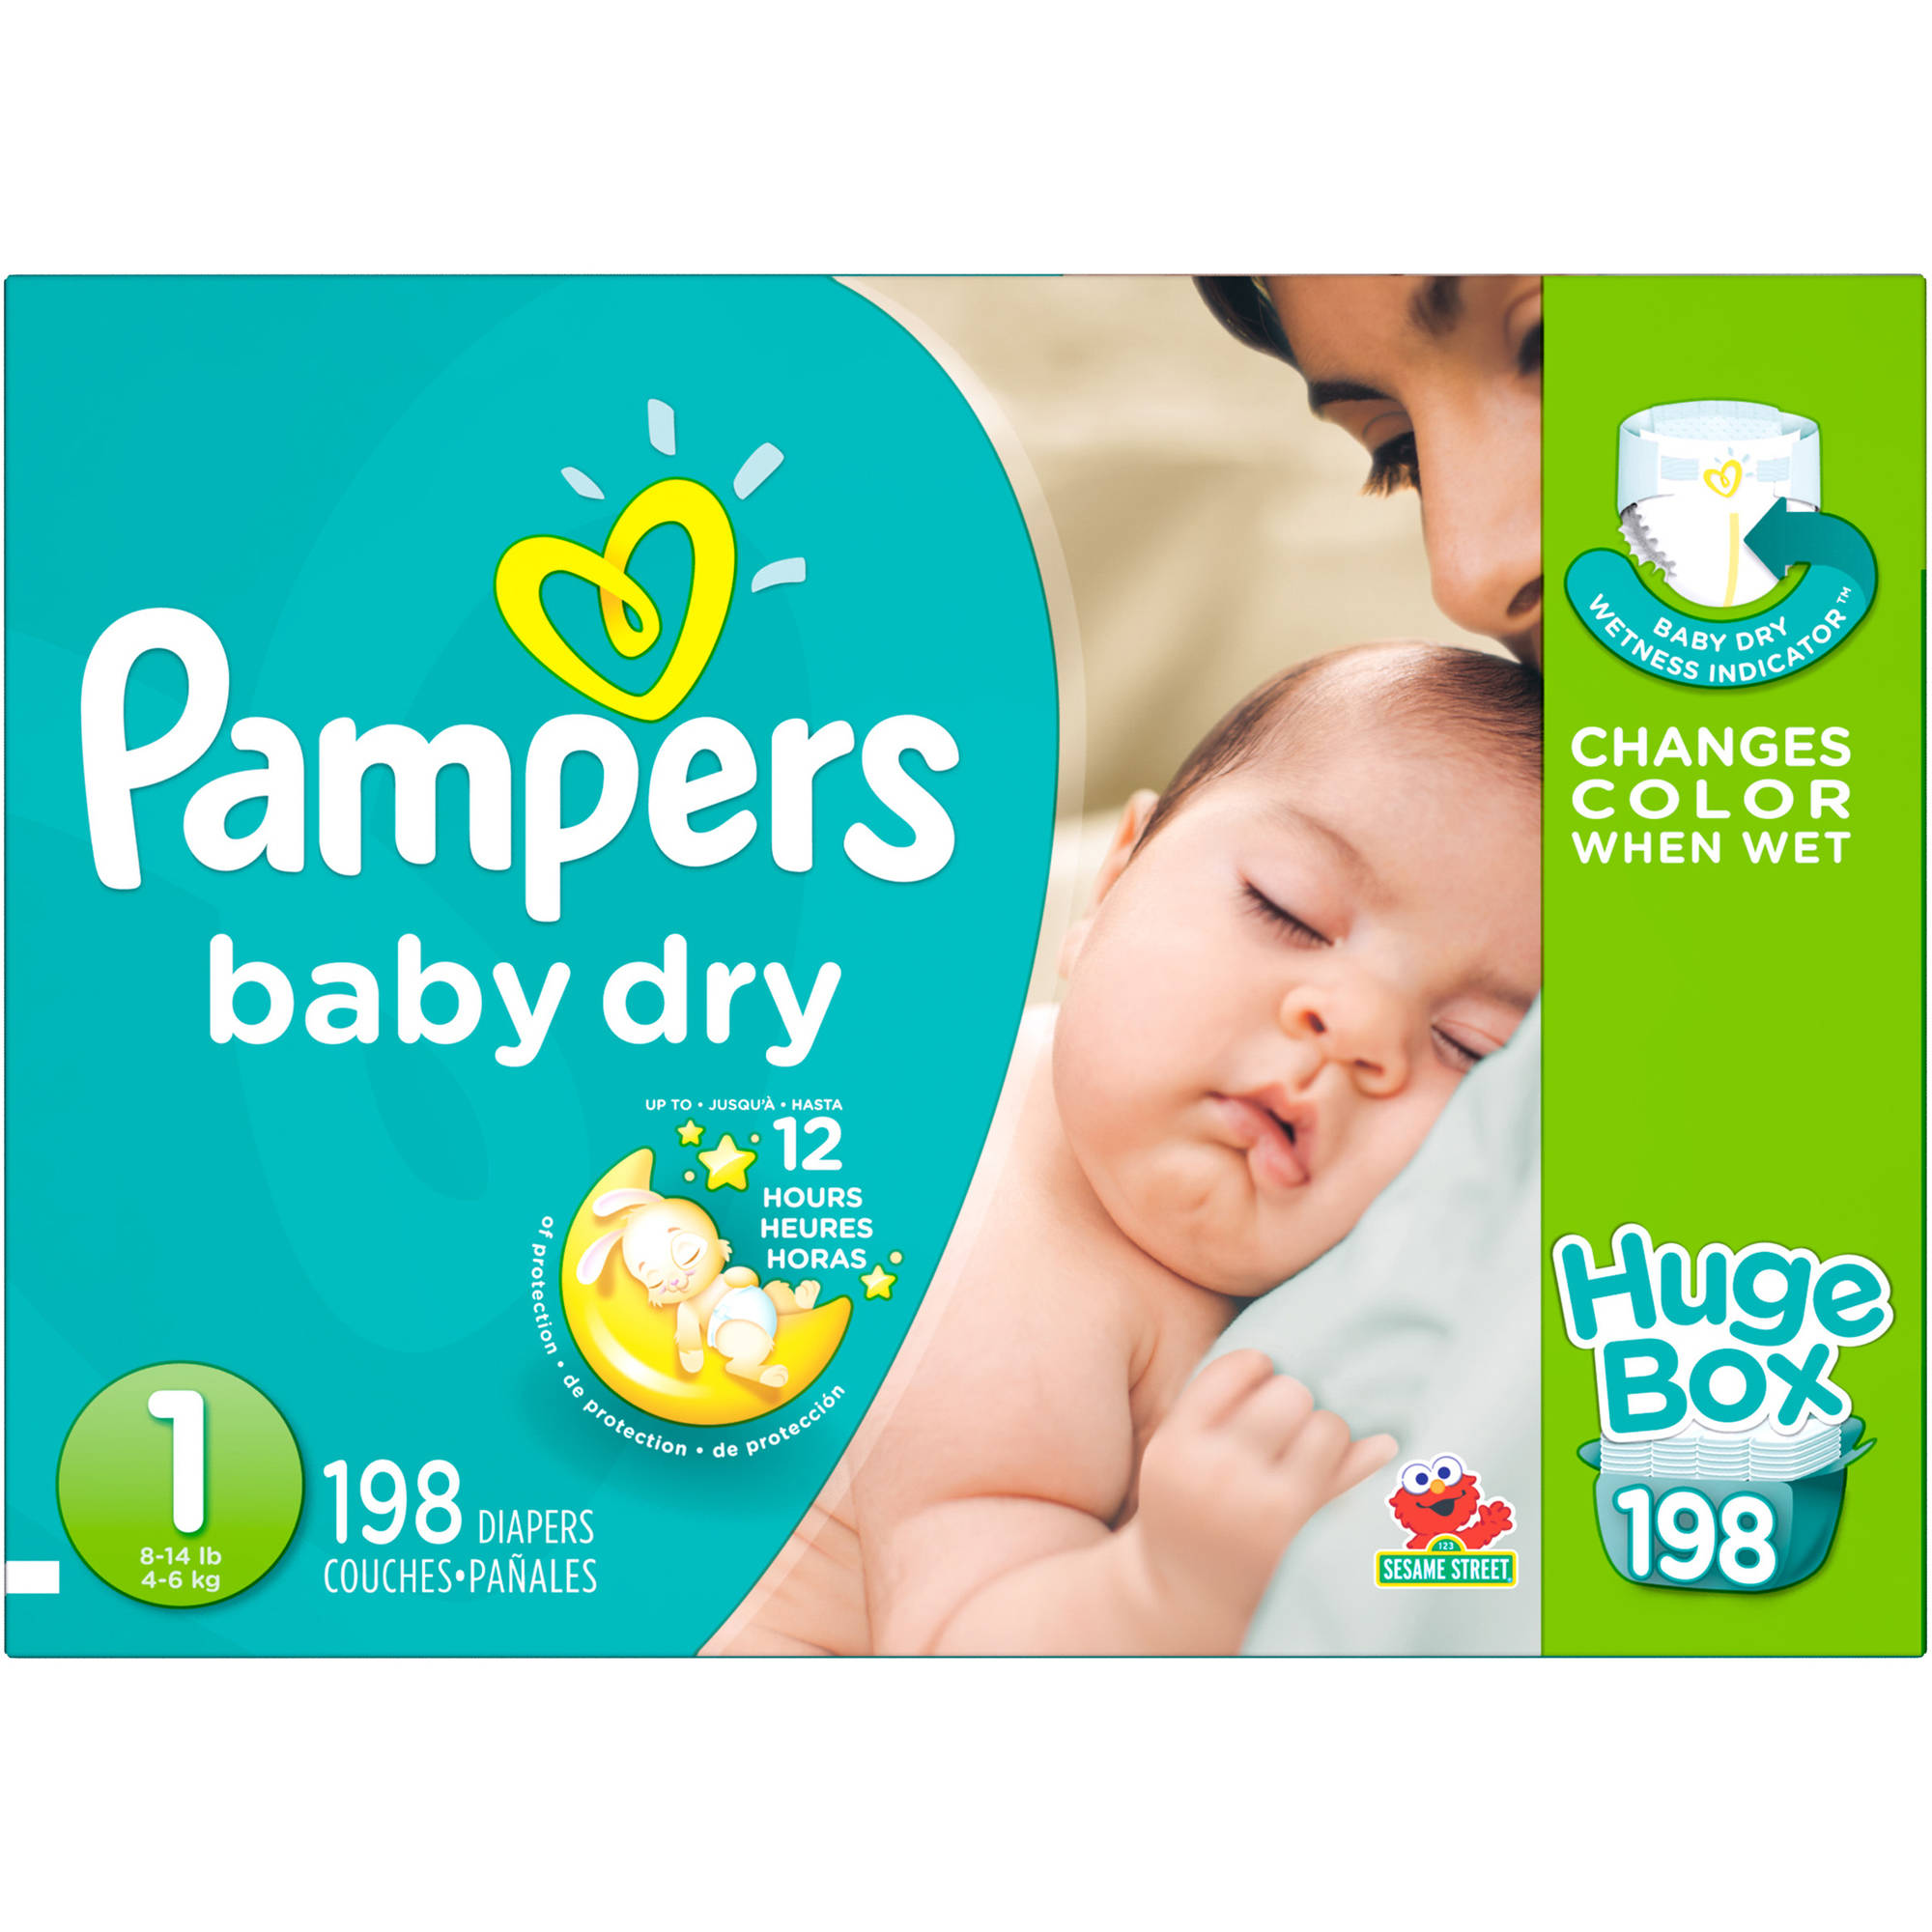 Pampers Baby Dry Diapers, Huge Pack, Size 1, 198 Diapers - image 3 of 8